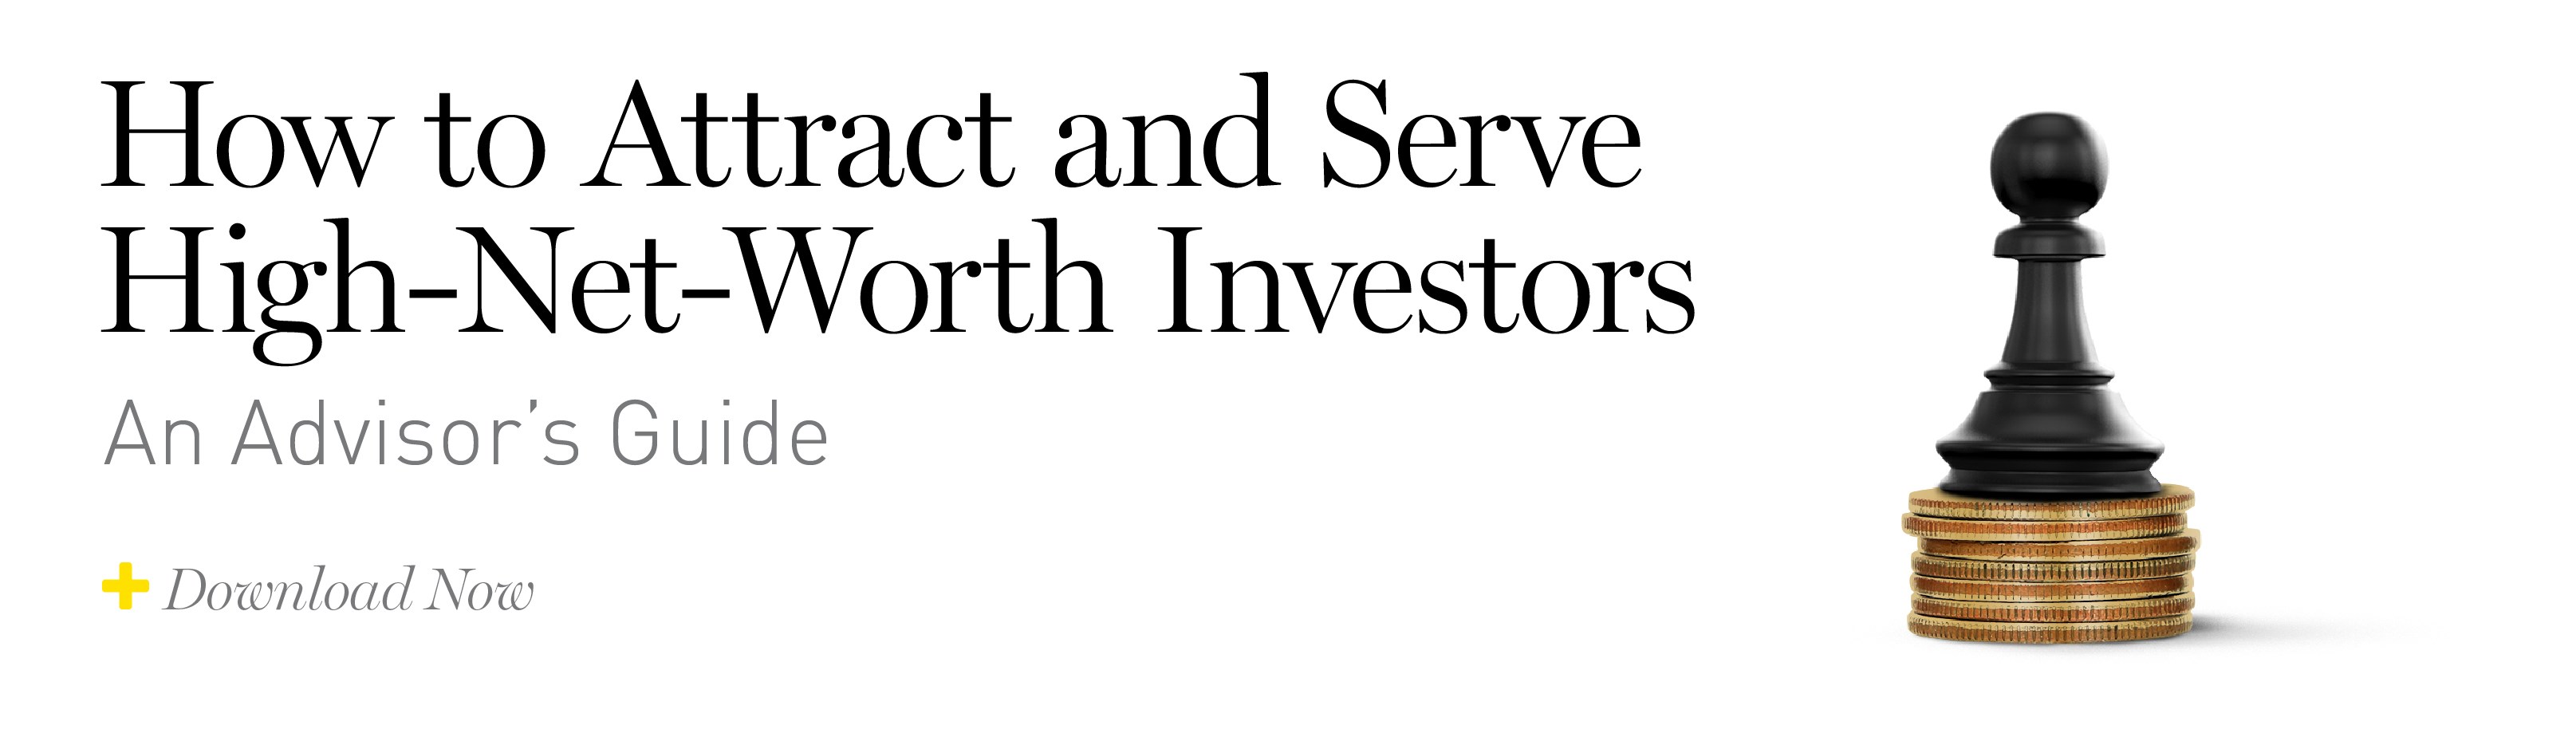 Click to download How to Attract and Serve High Net Worth Investors - An Advisor's Guide.